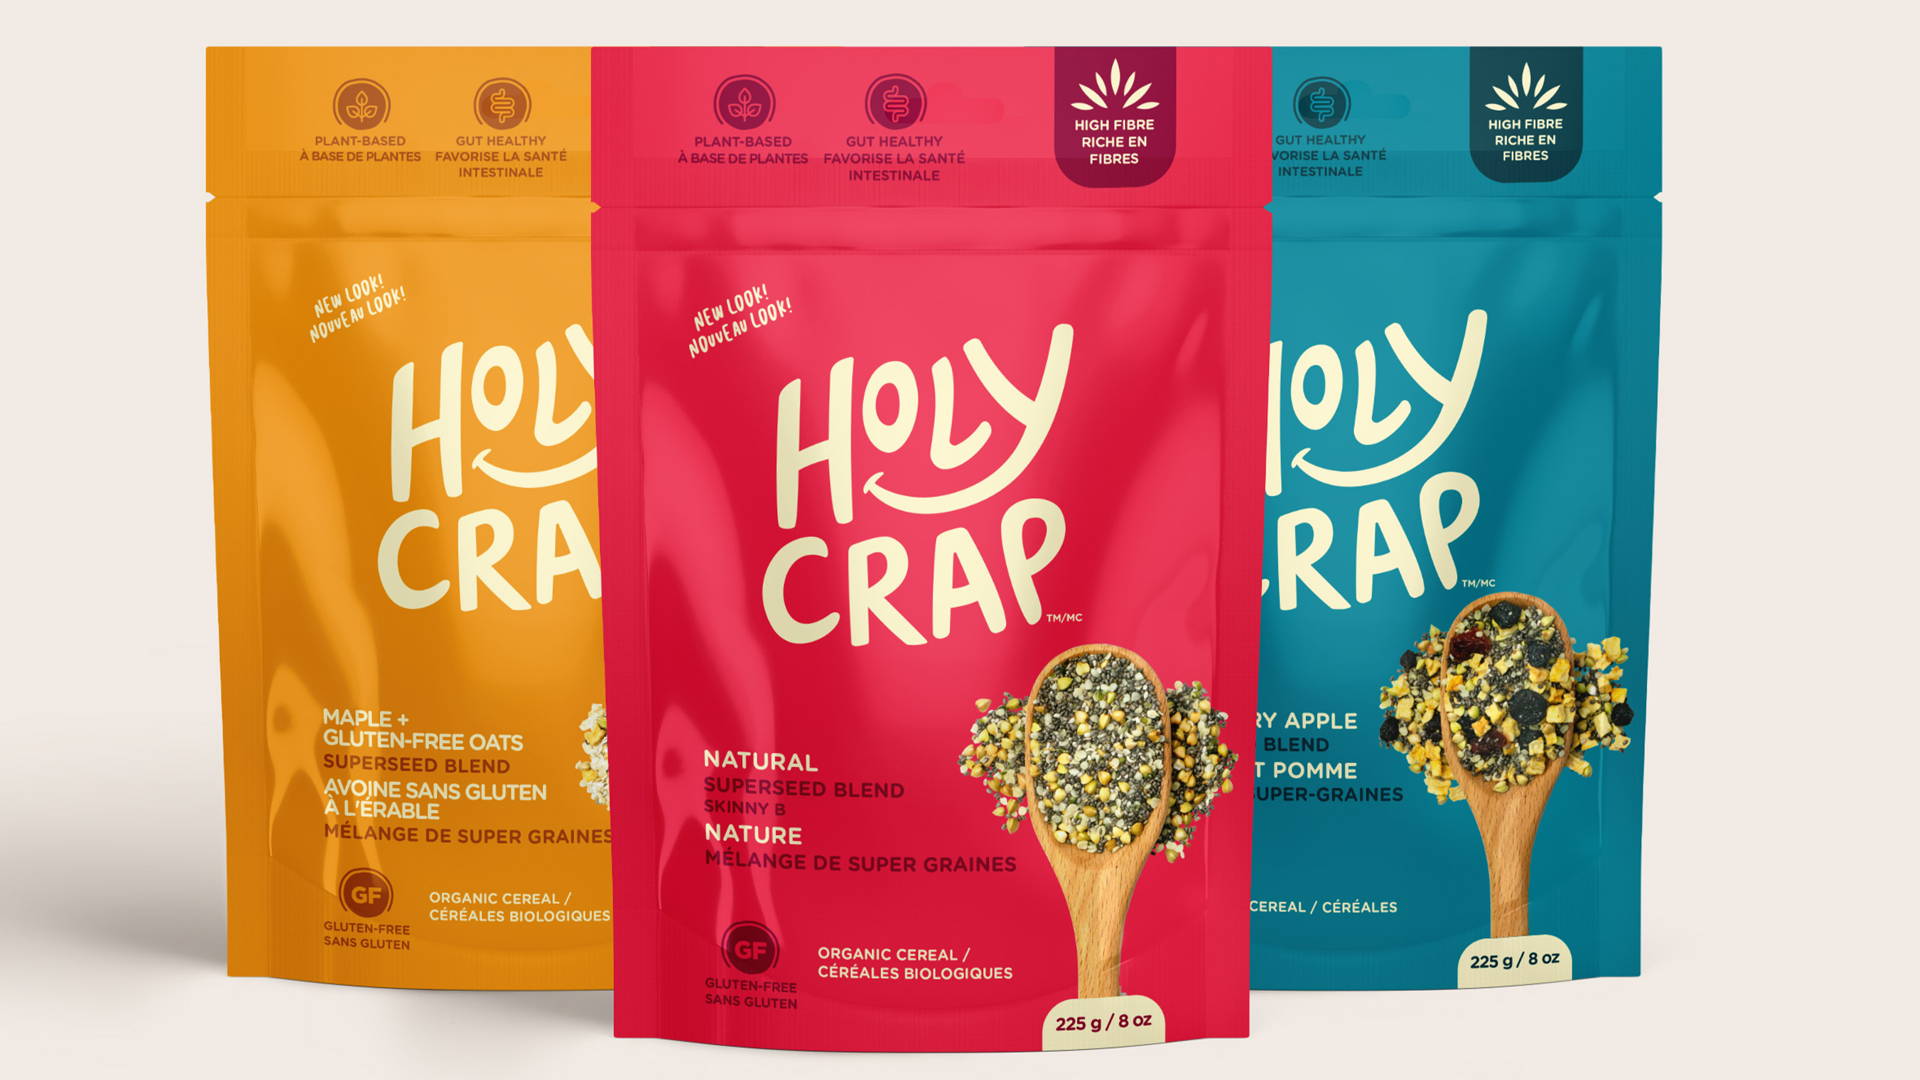 Featured image for This Cereal Brand's Refresh Will Have You Saying "Holy Crap!"